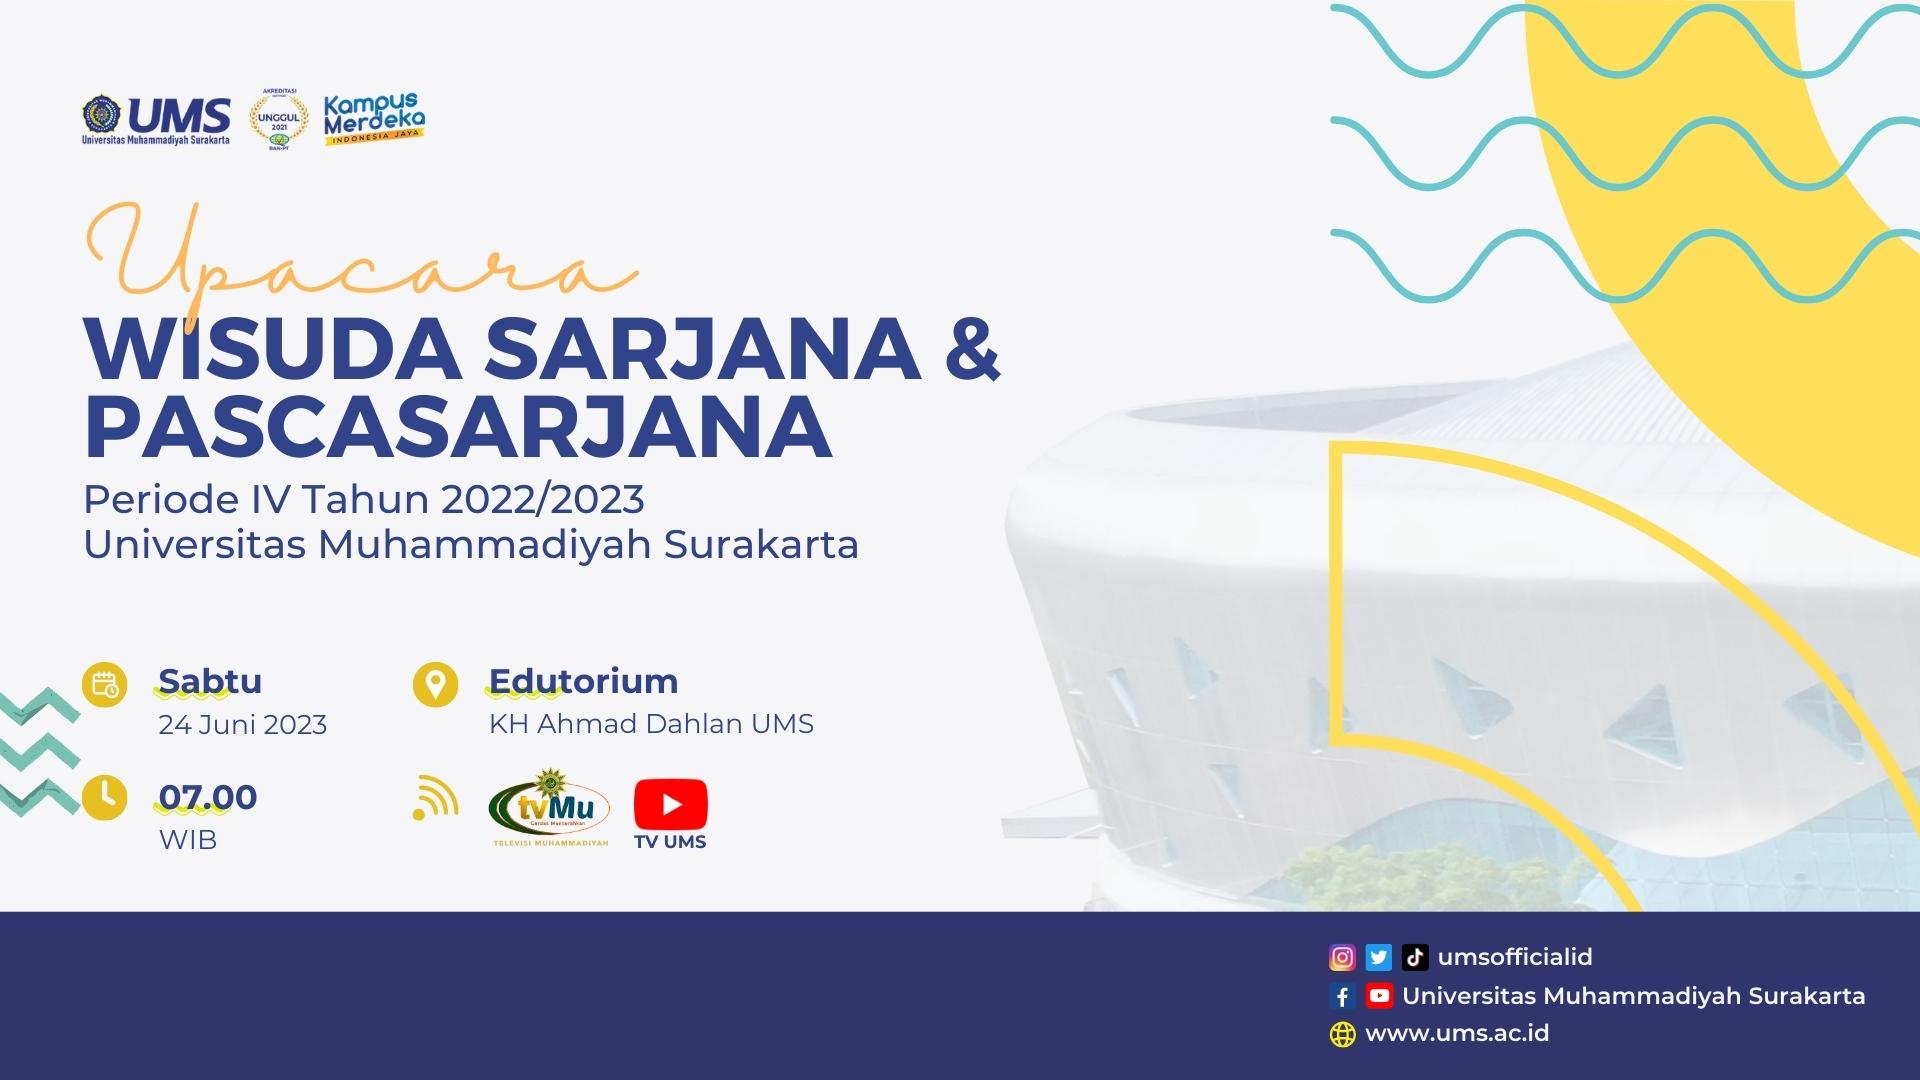 You are currently viewing Dokumentasi Wisuda UMS Periode IV Tahun 2022/2023